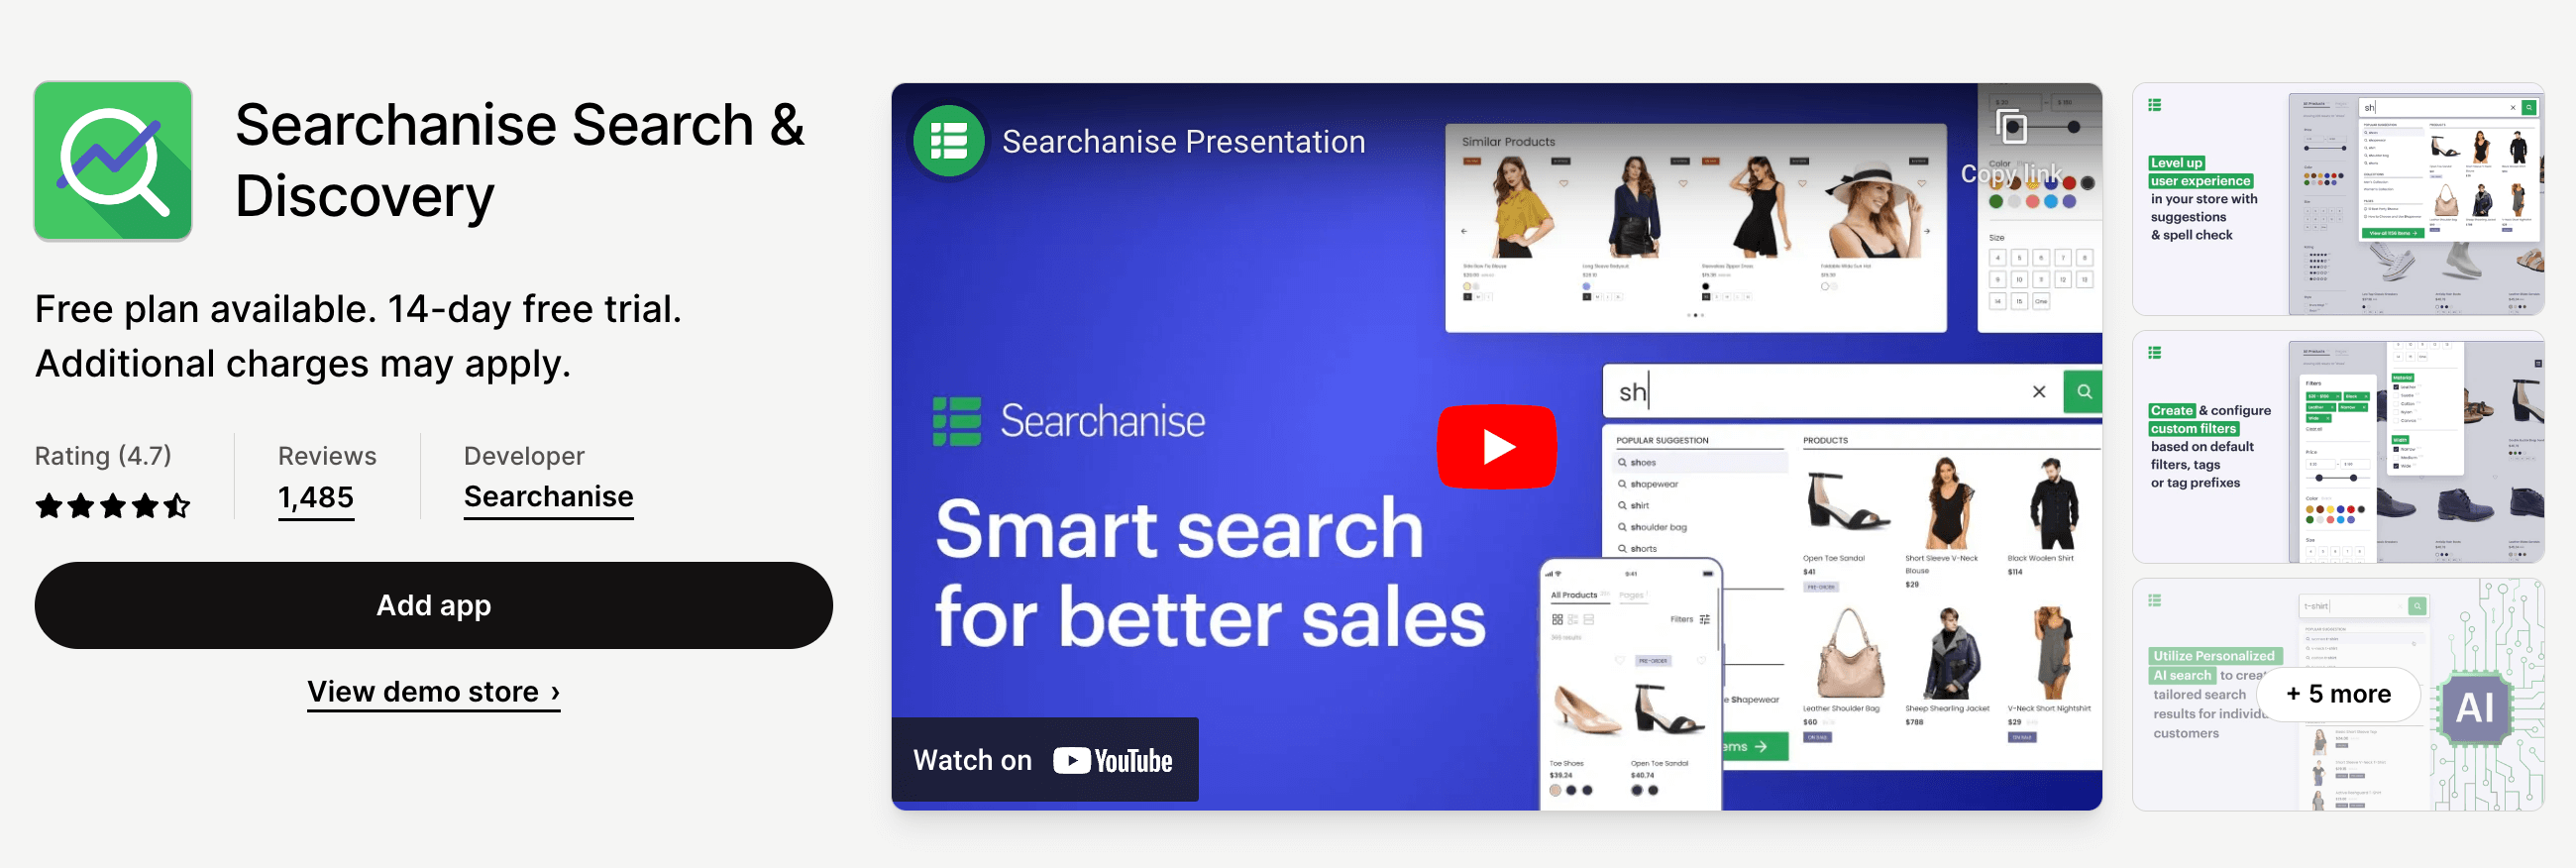 Searchanise Search & Discovery